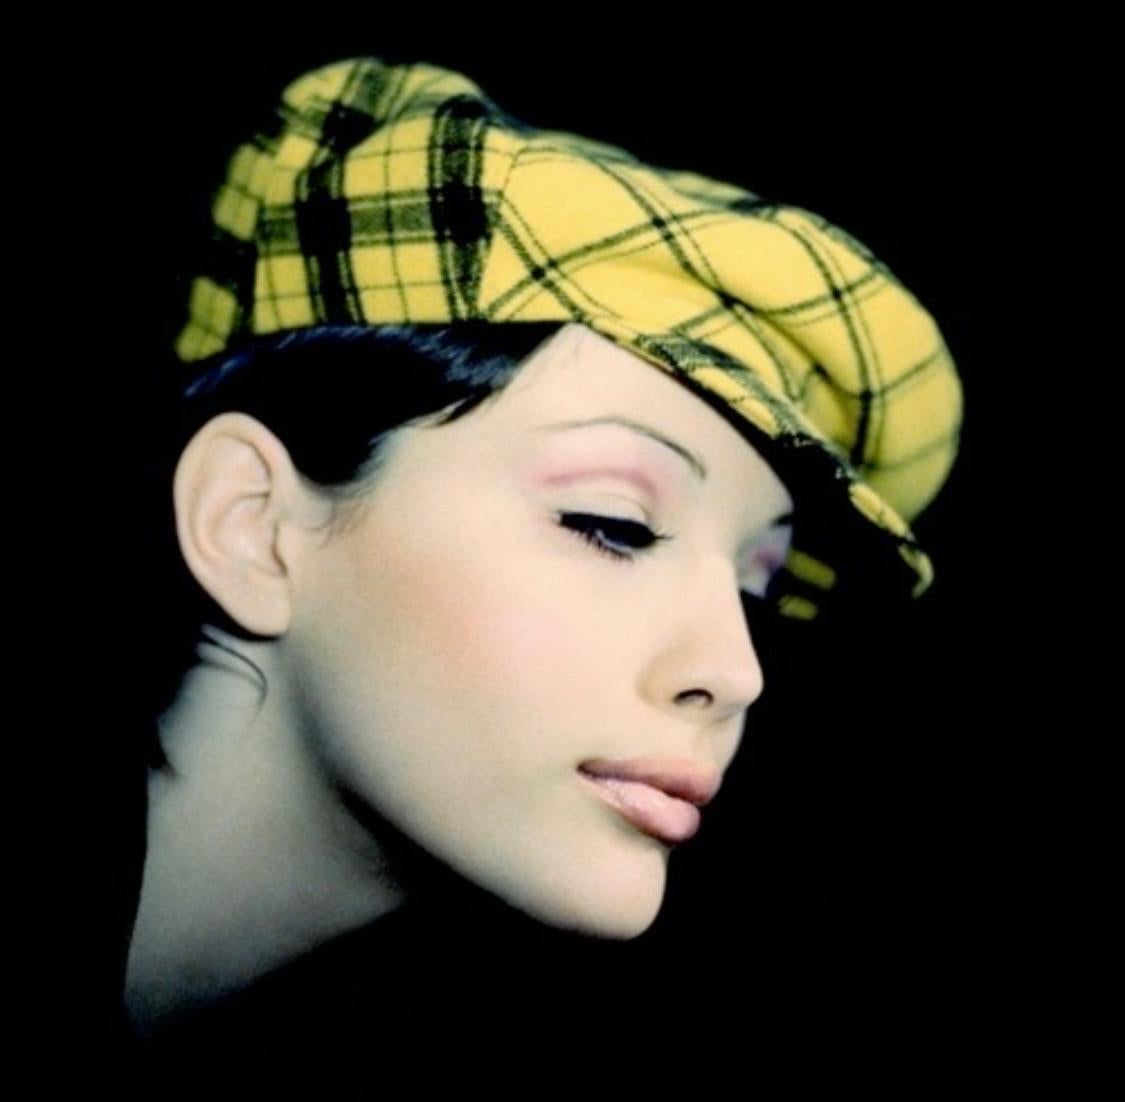 Presenting a yellow check paperboy style Gianni Versace Couture hat, designed by Gianni Versace. From the Fall/Winter 1993 collection, this oversized paperboy hat is constructed of two different patterns of flannel plaid and features a small brim.